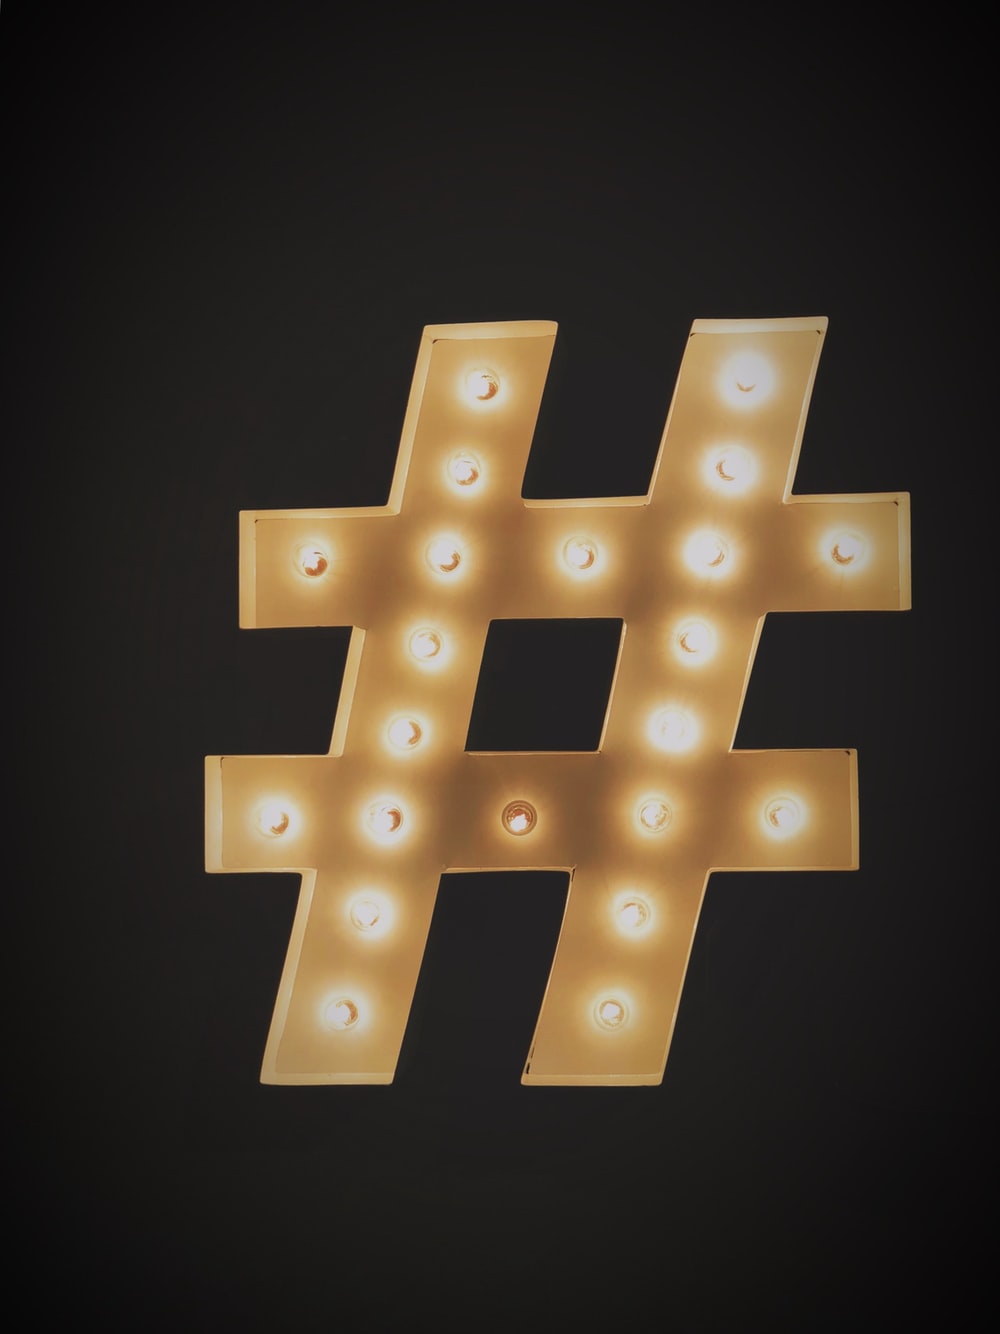 Instagram Hashtags Grow Your Business